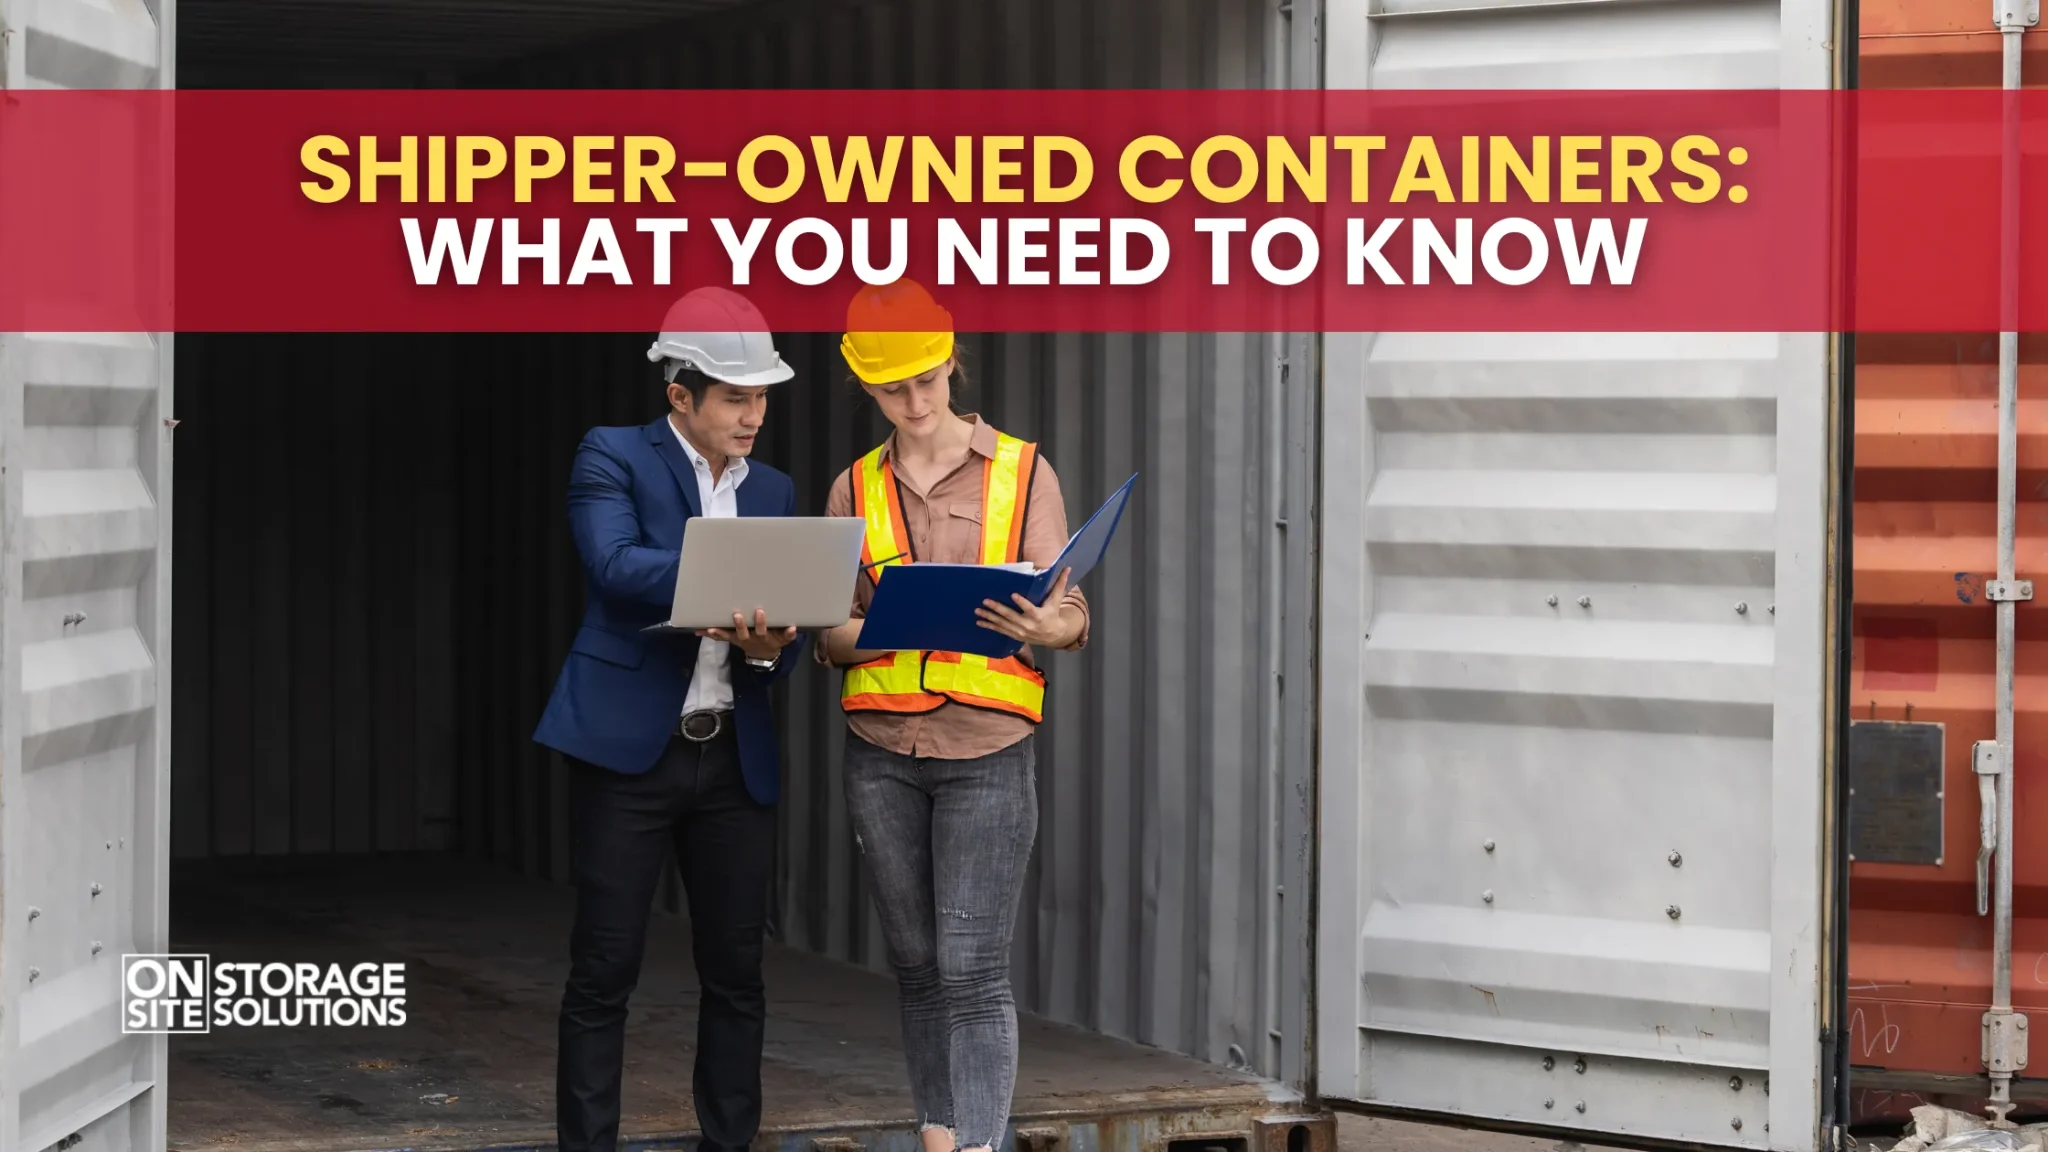 Shipper-Owned Containers: What You Need to Know